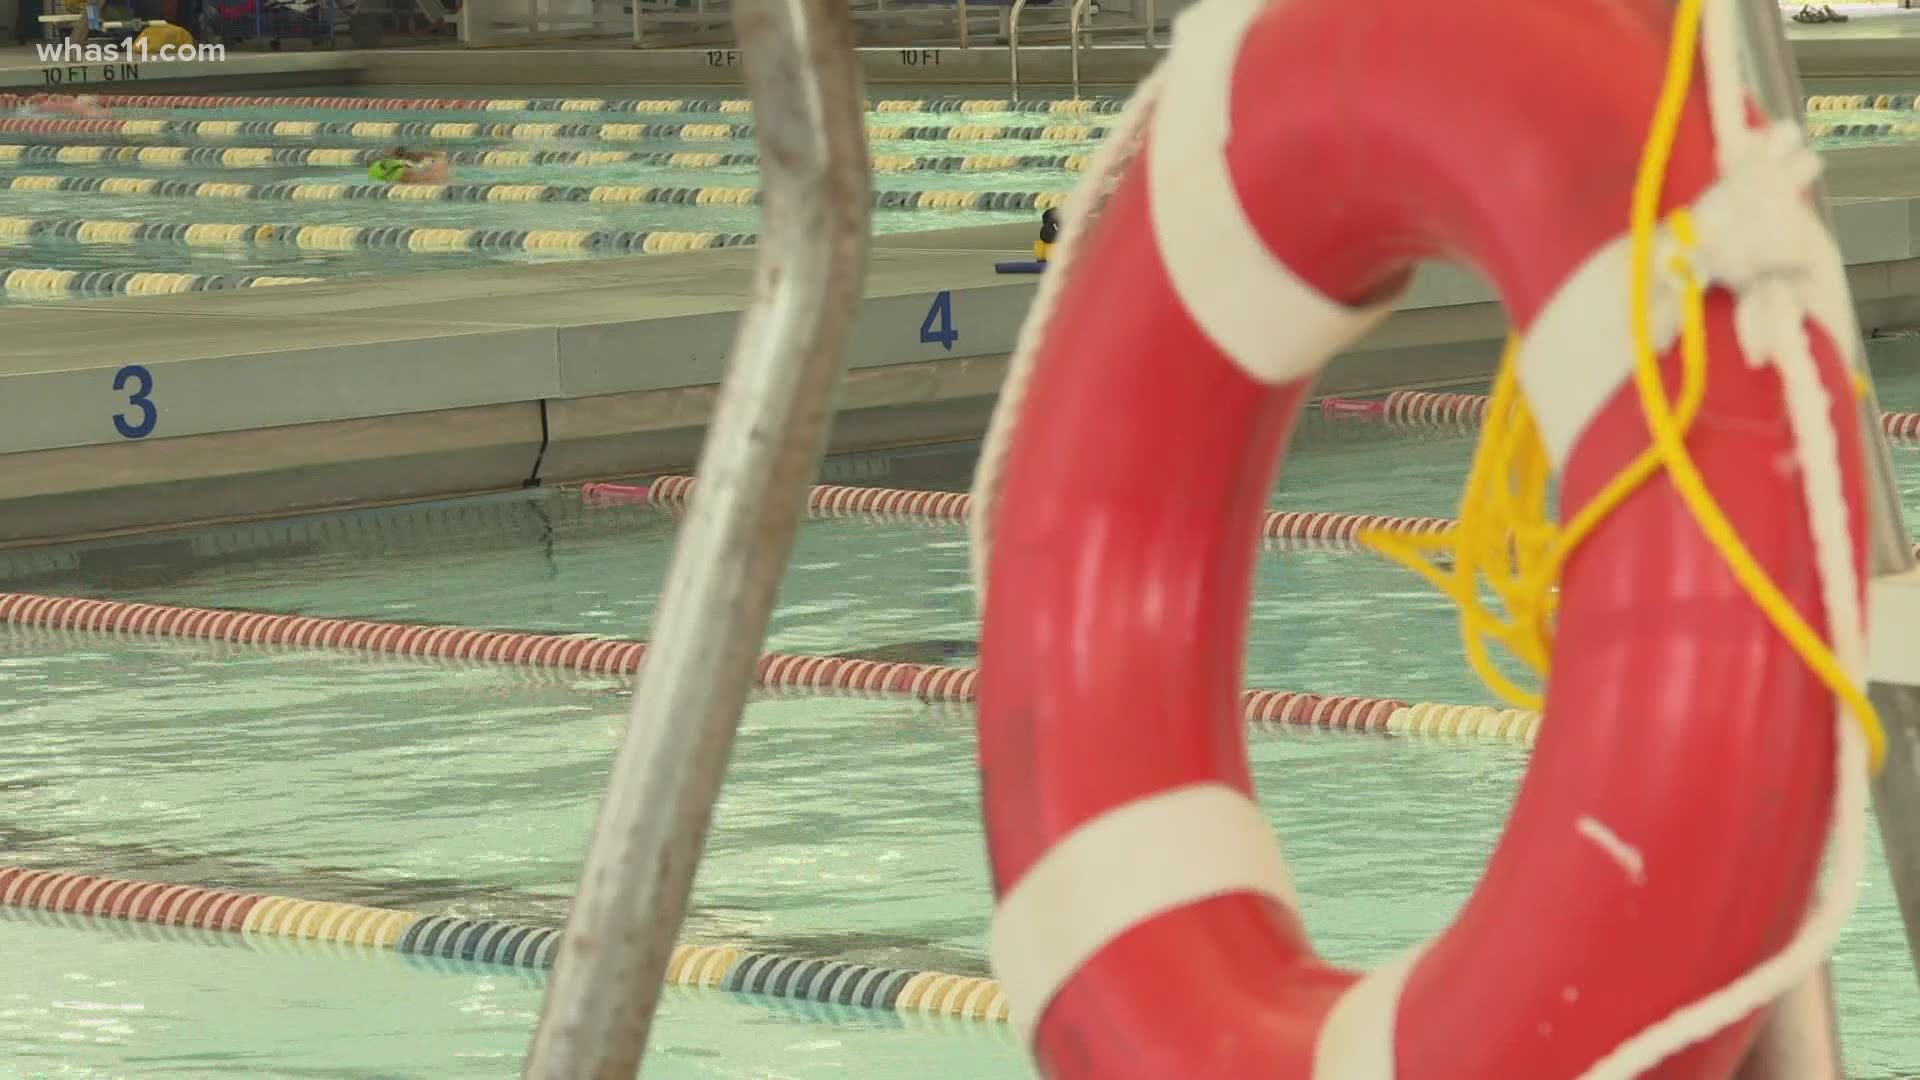 Parents are thankful for chance to teach children how to swim ahead of summer.